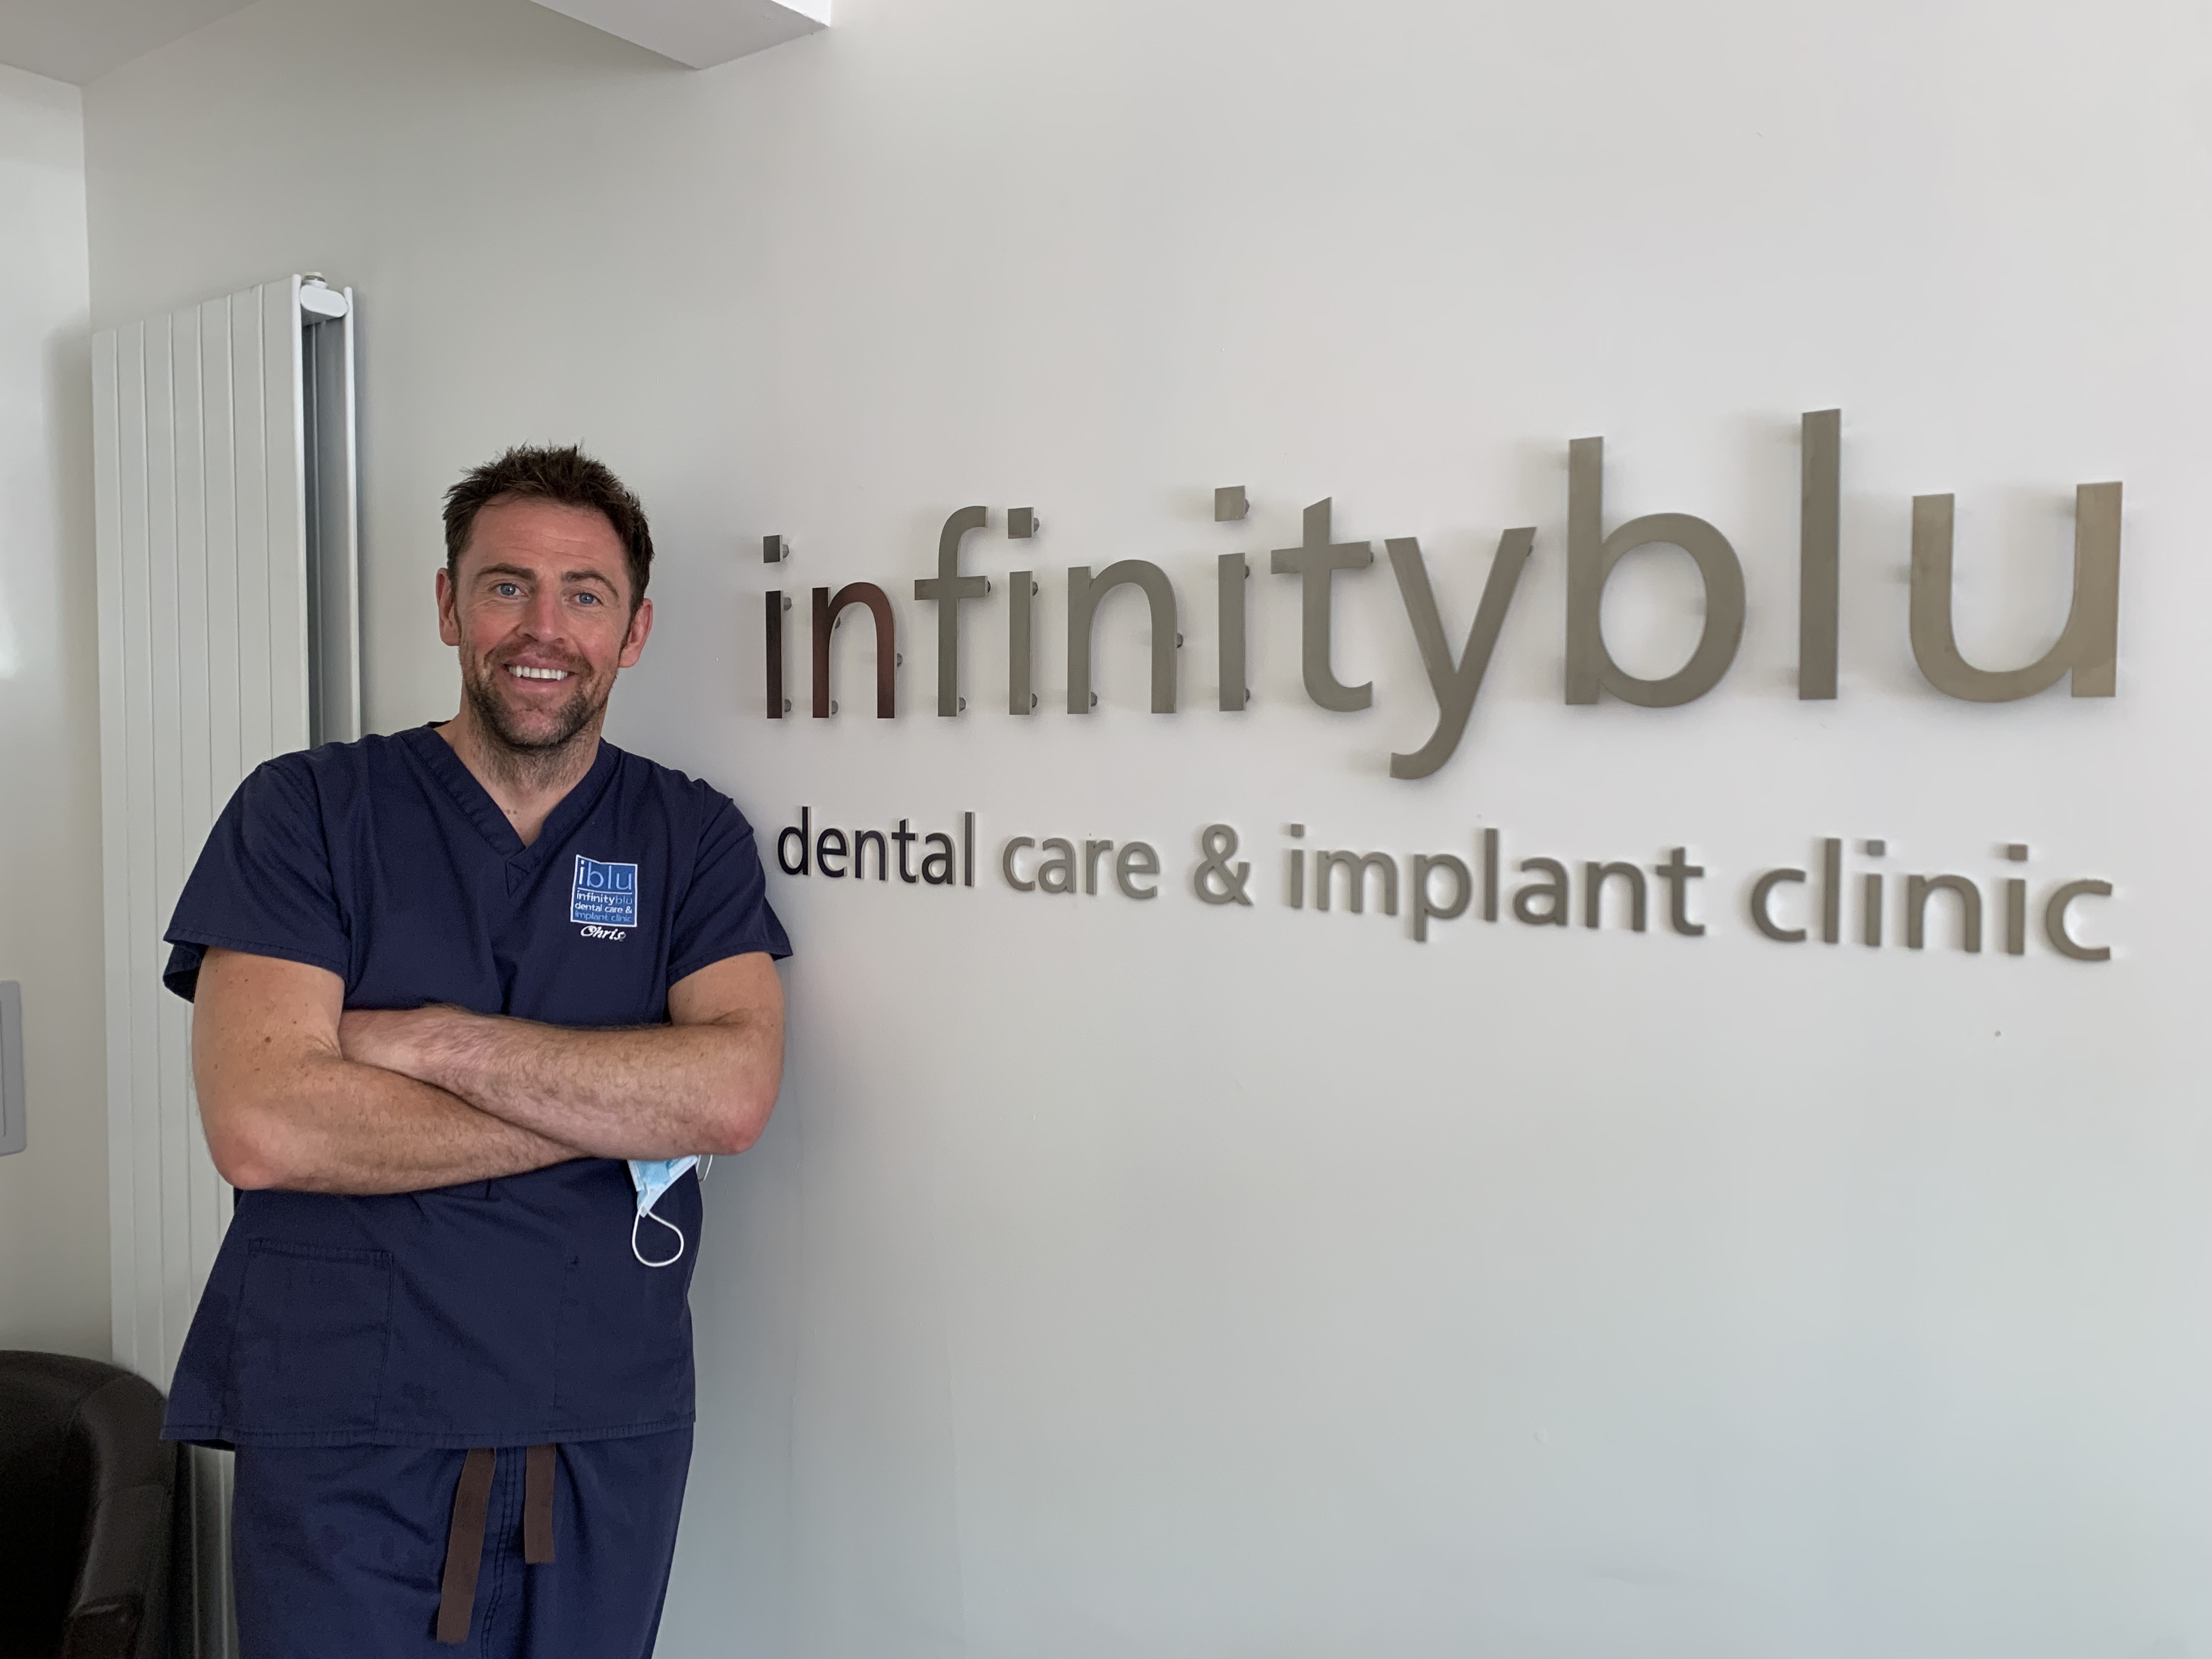 Infinityblu Dental Care and Implant Clinic expands in £1m double buy-out